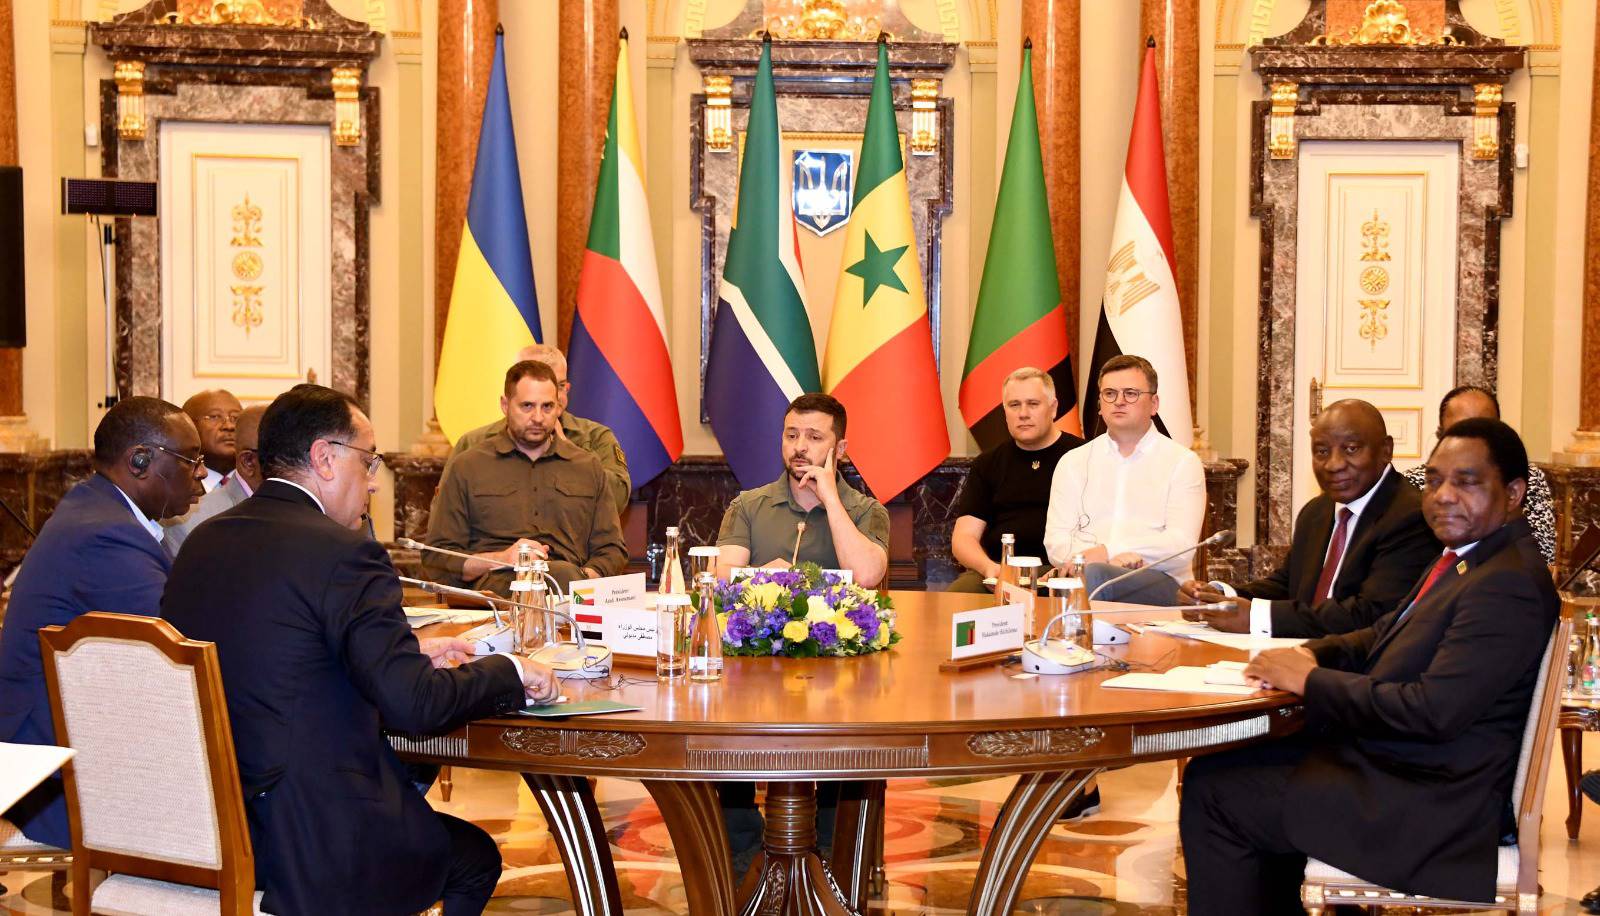 President Volodymyr Zelenskyy of Ukraine welcomed the delegation of African heads of state and government representing the African Leaders Peace Mission to Ukraine and Russia in 2023.